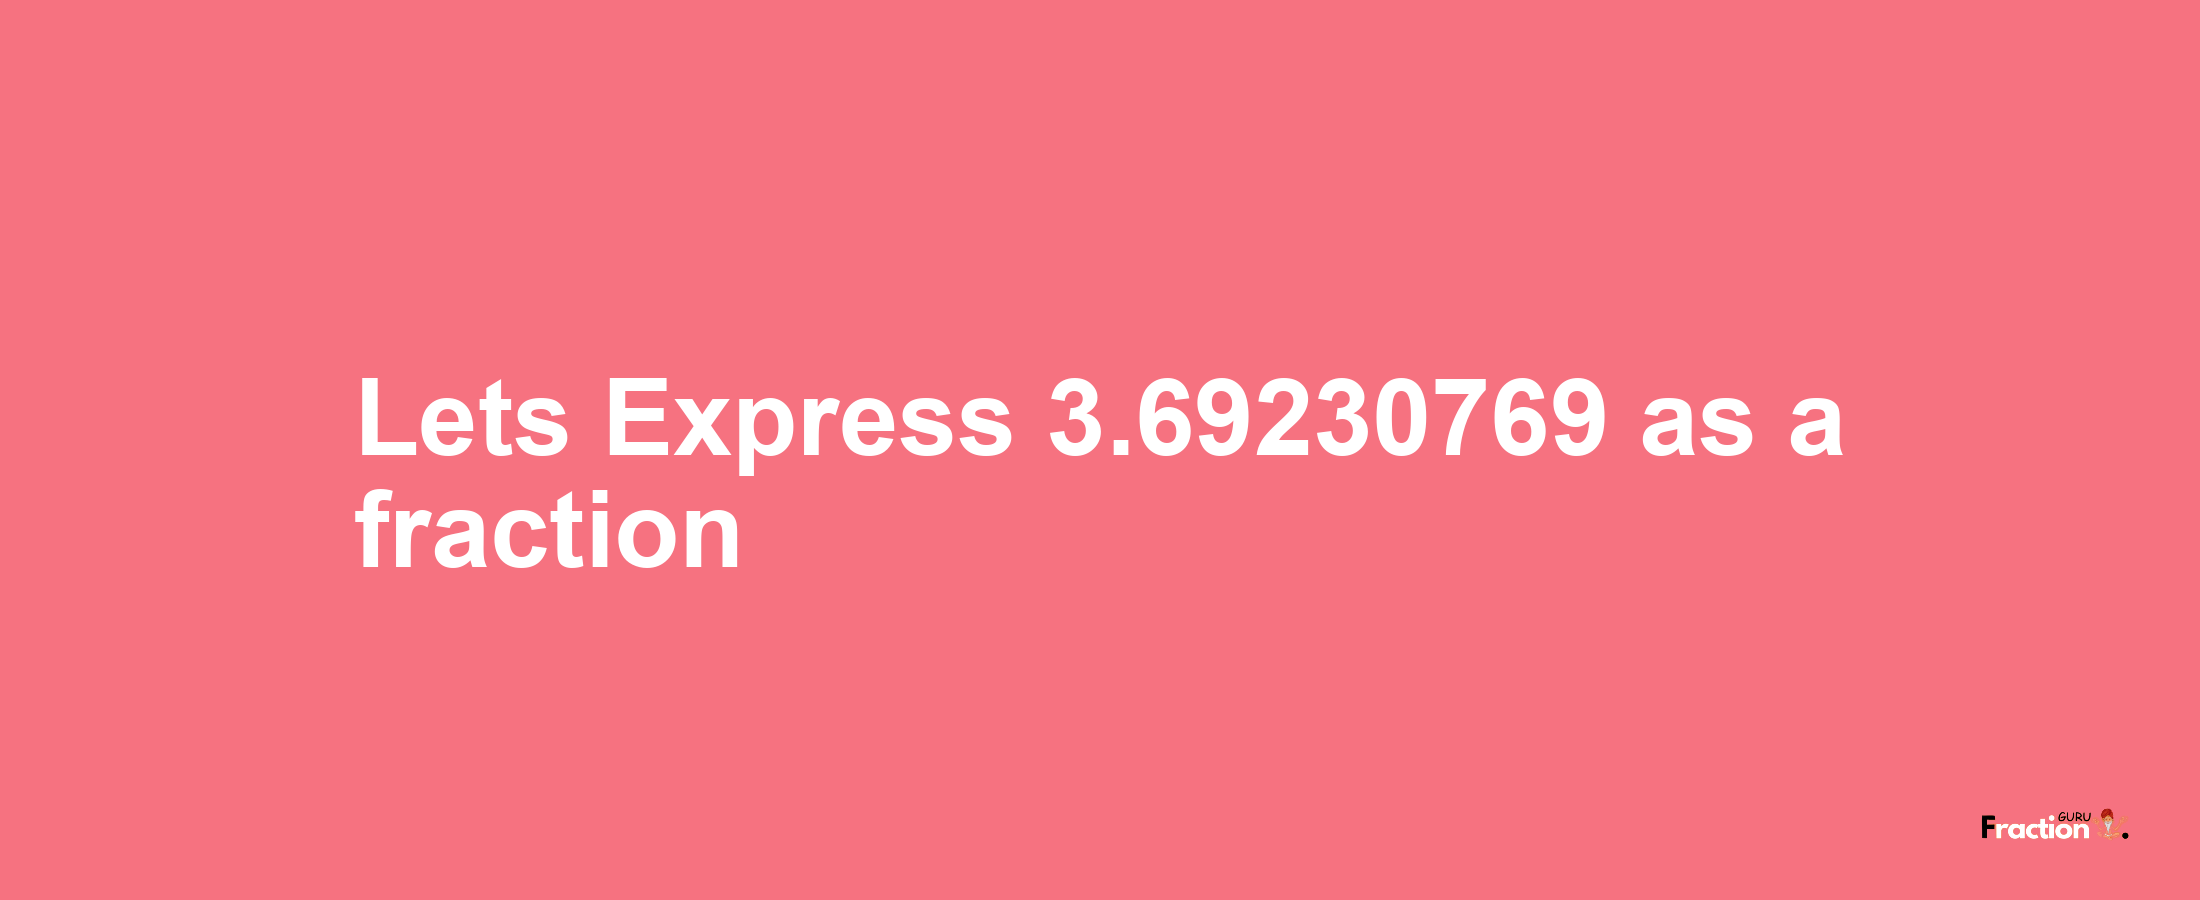 Lets Express 3.69230769 as afraction